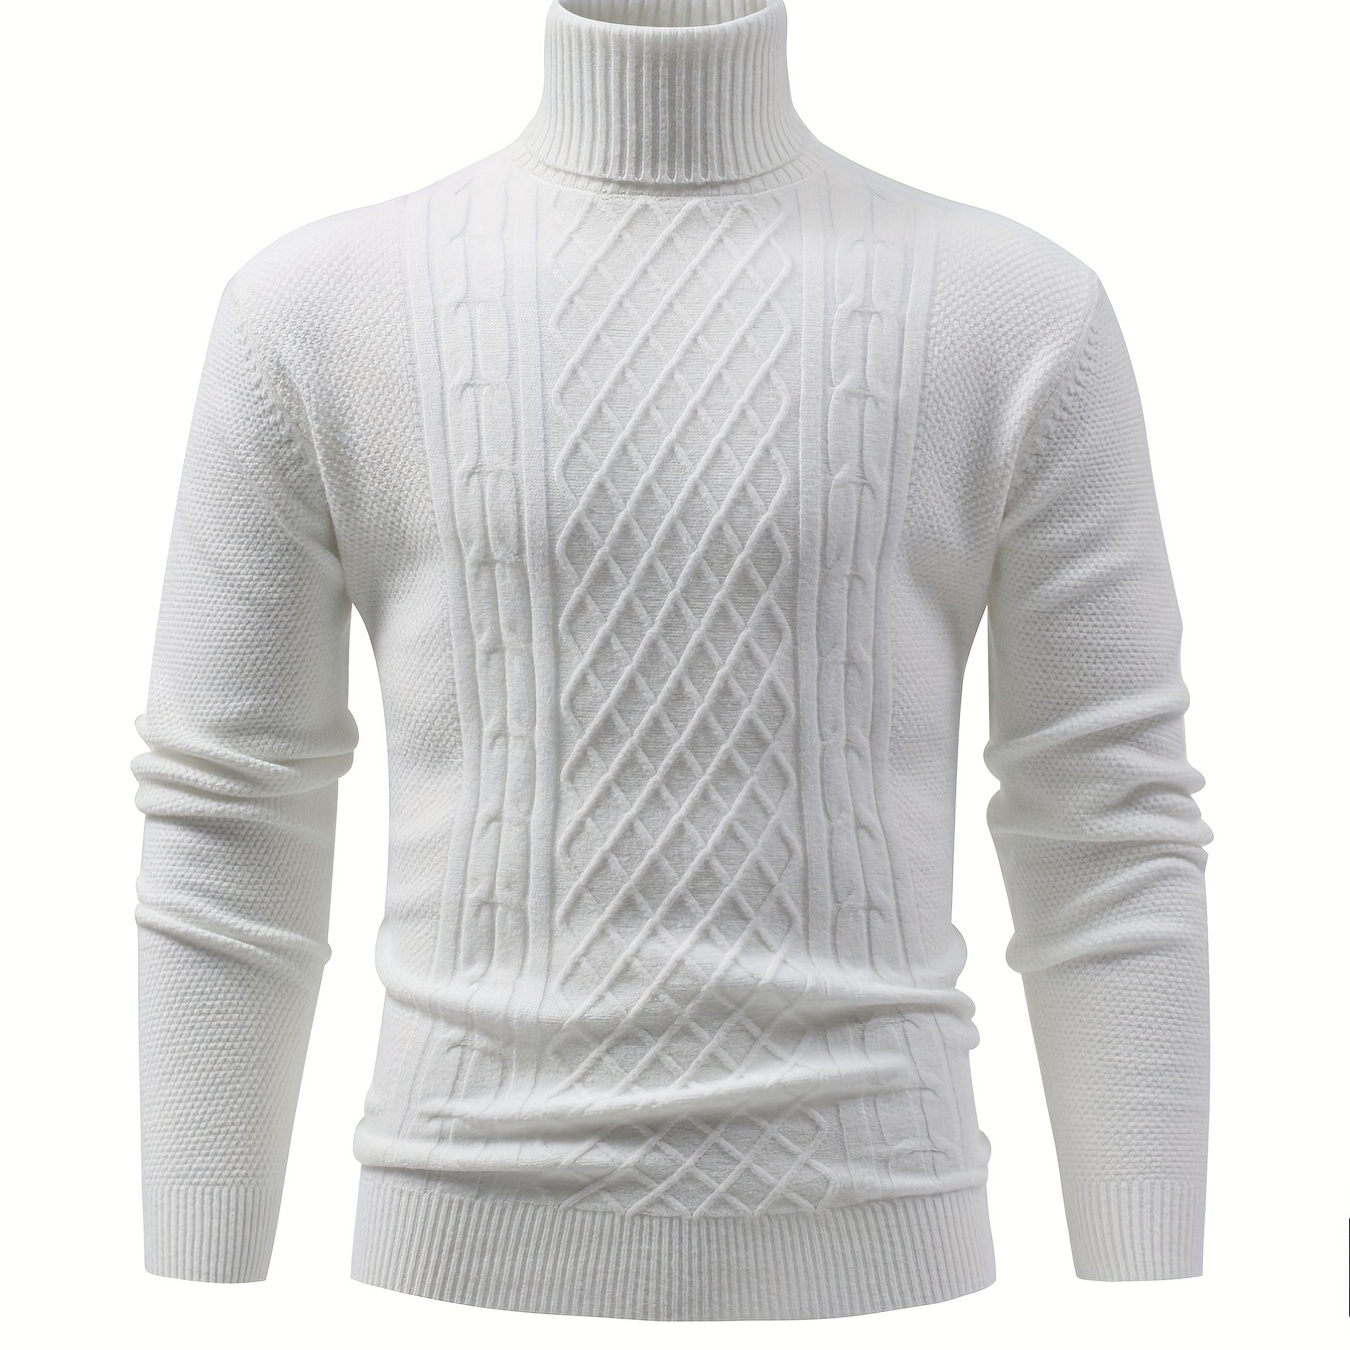 

Turtle Neck Knitted Cable Sweater, Men's Casual Warm Solid High Stretch Pullover Sweater For Fall Winter